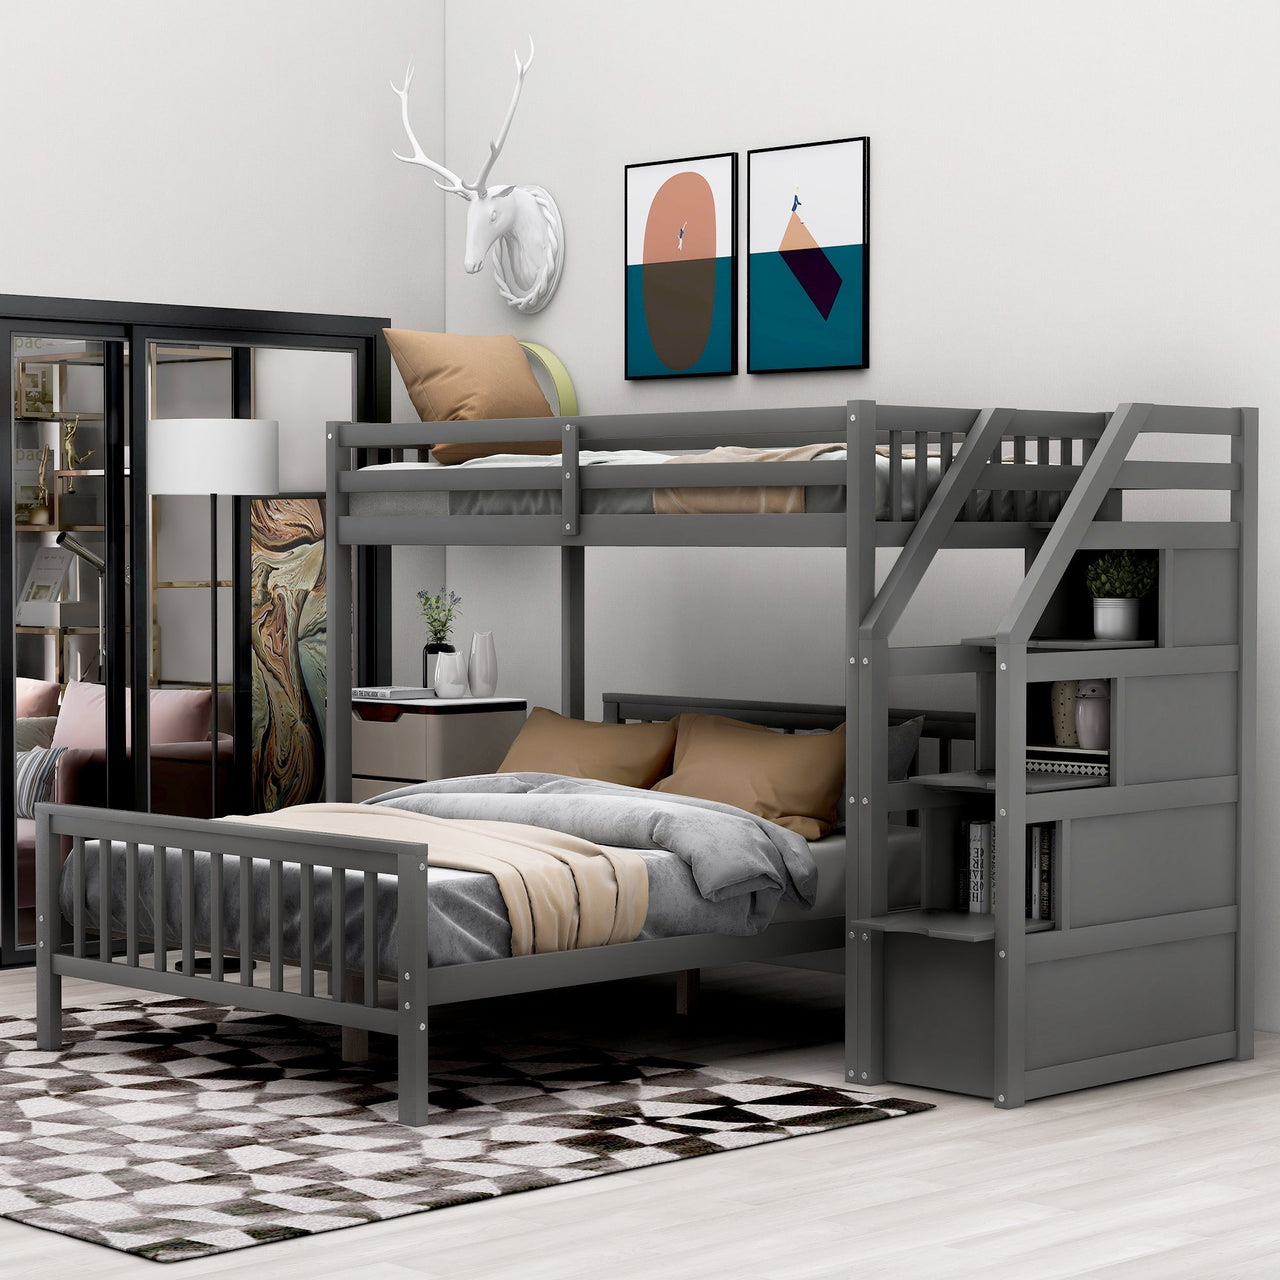 Twin Bunk Bed with Stairs and Drawers - Casatrail.com